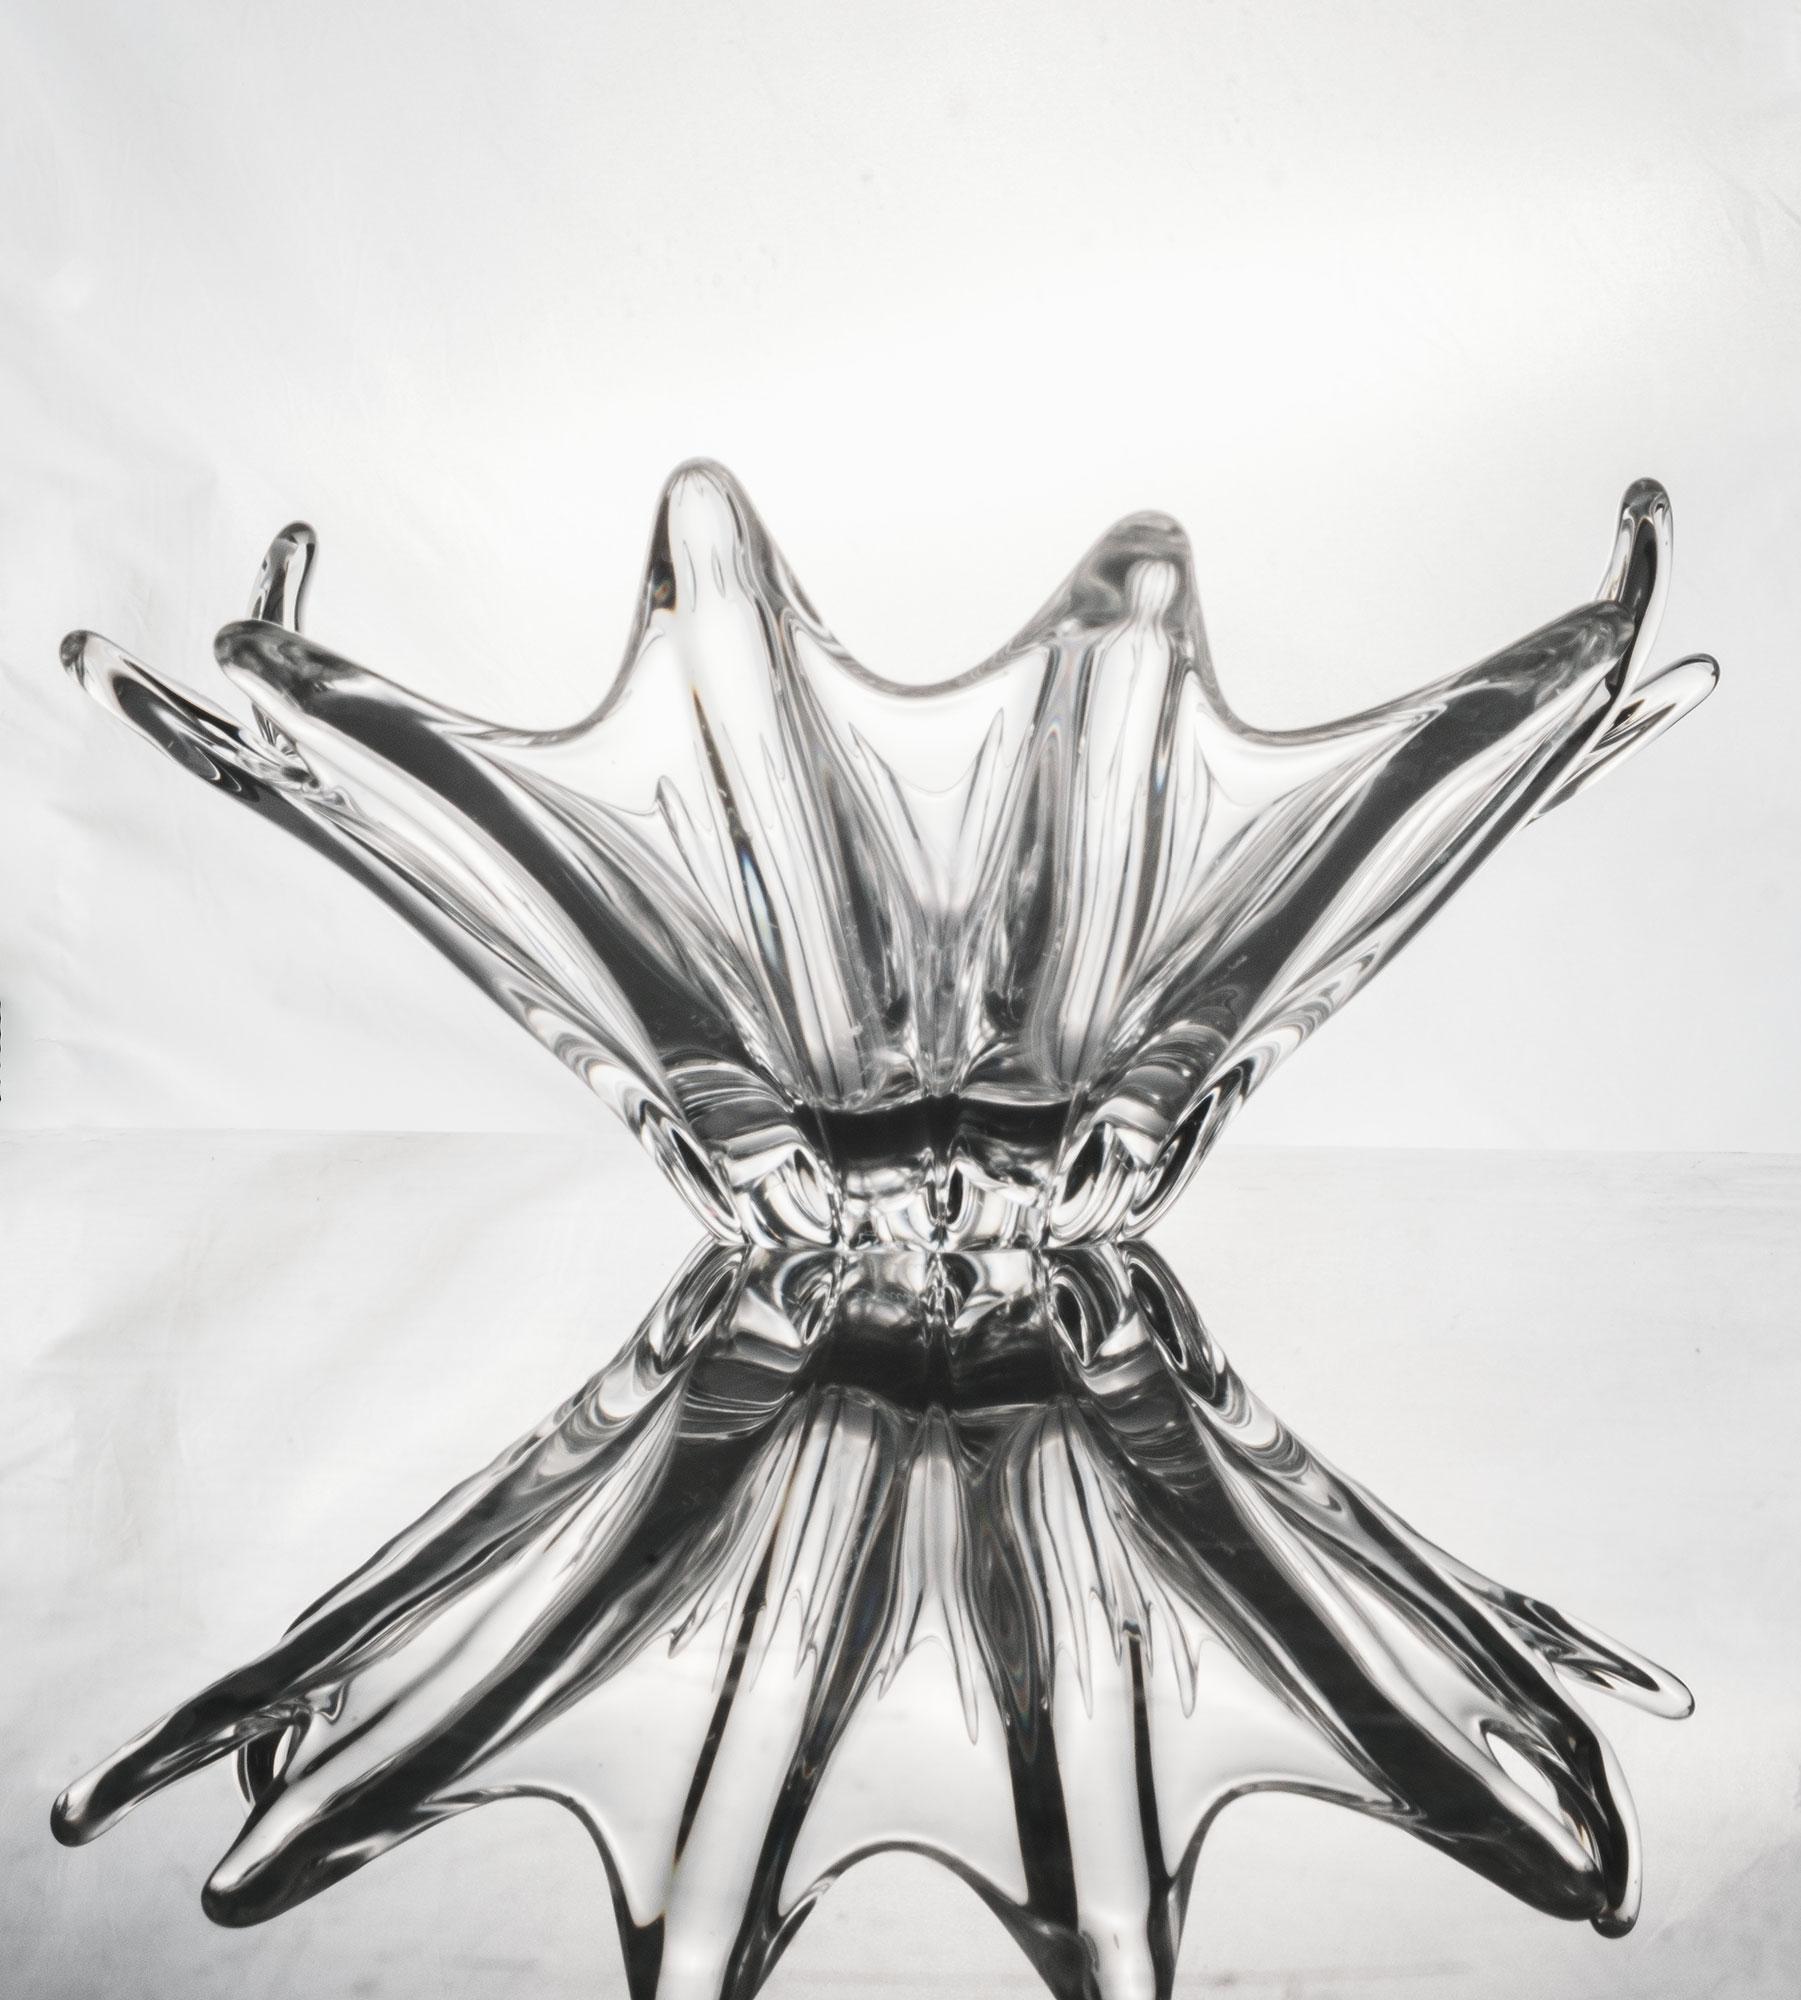 Hand-Crafted Sculptural Crystal Glass Centerpiece from Daum France For Sale